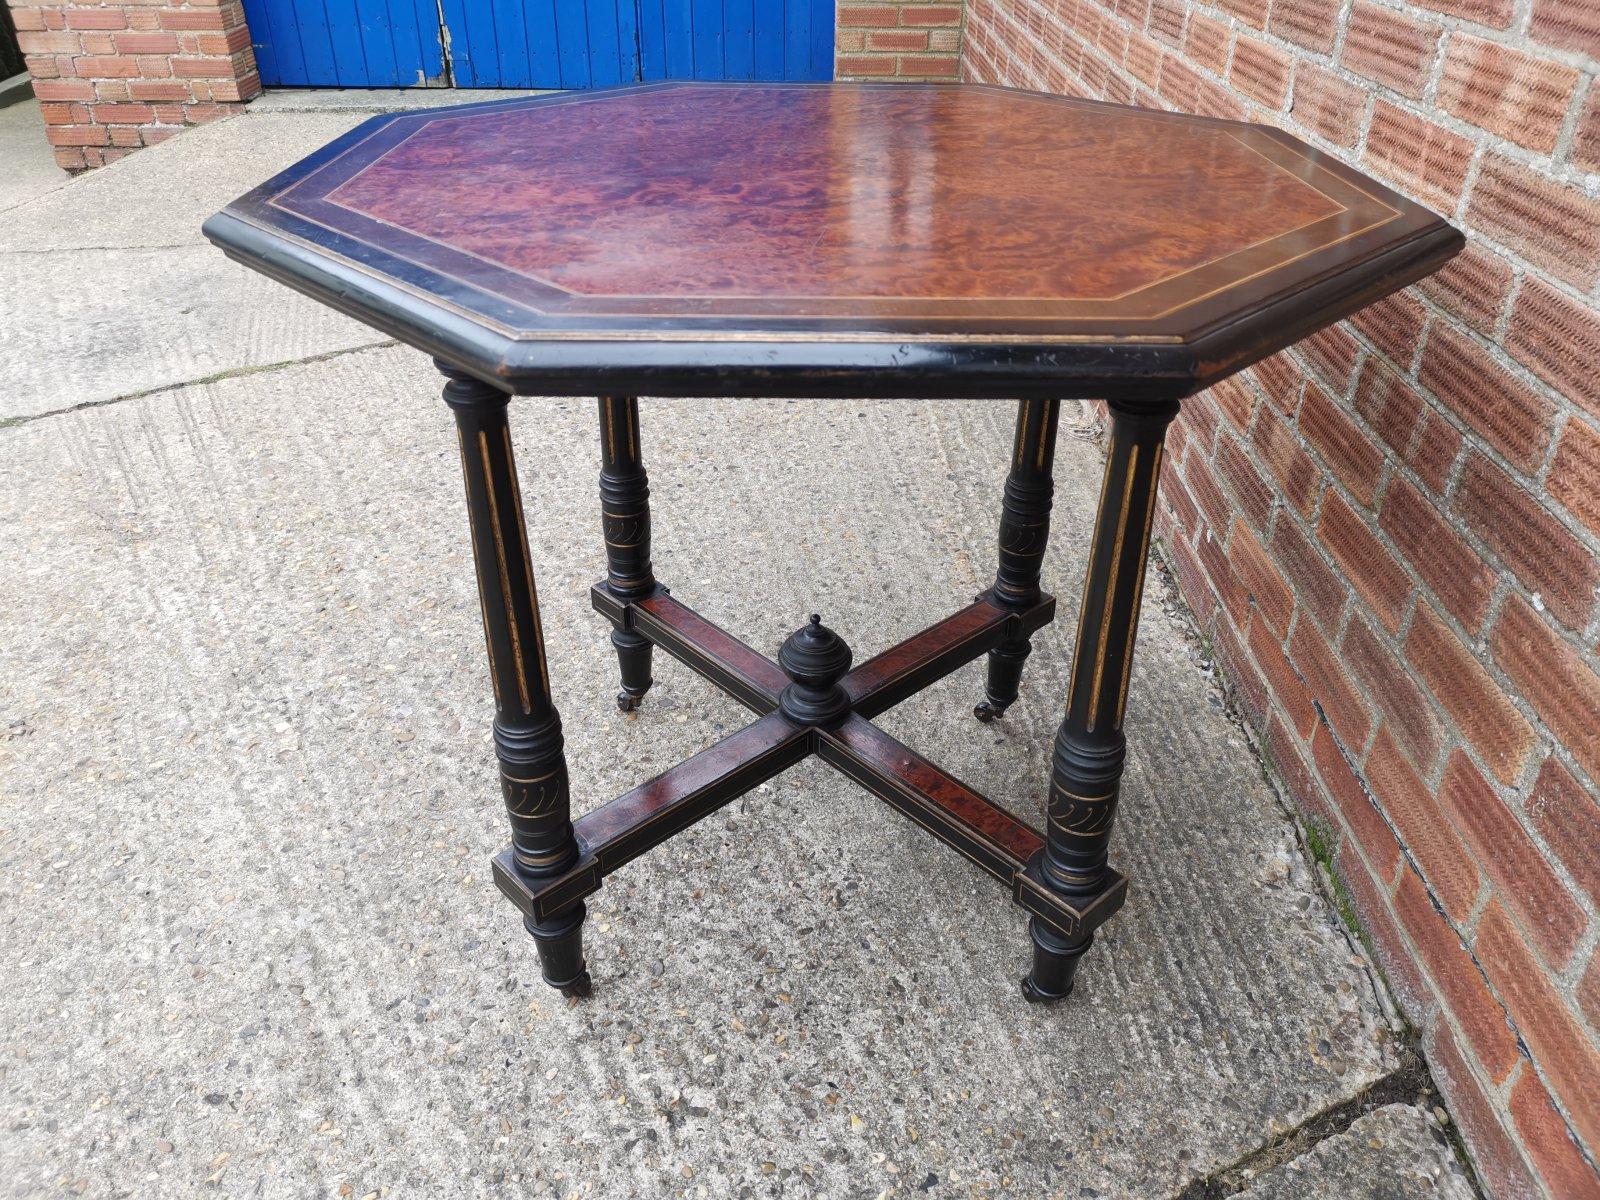 Gillows attributed.
An Aesthetic Movement Ebonized Mahogany Octagonal Centre Table with a wonderful burr Amboyna top with line inlay and ebonized to the edges.
The four turned legs with incised gilt decoration united by a cross stretcher with